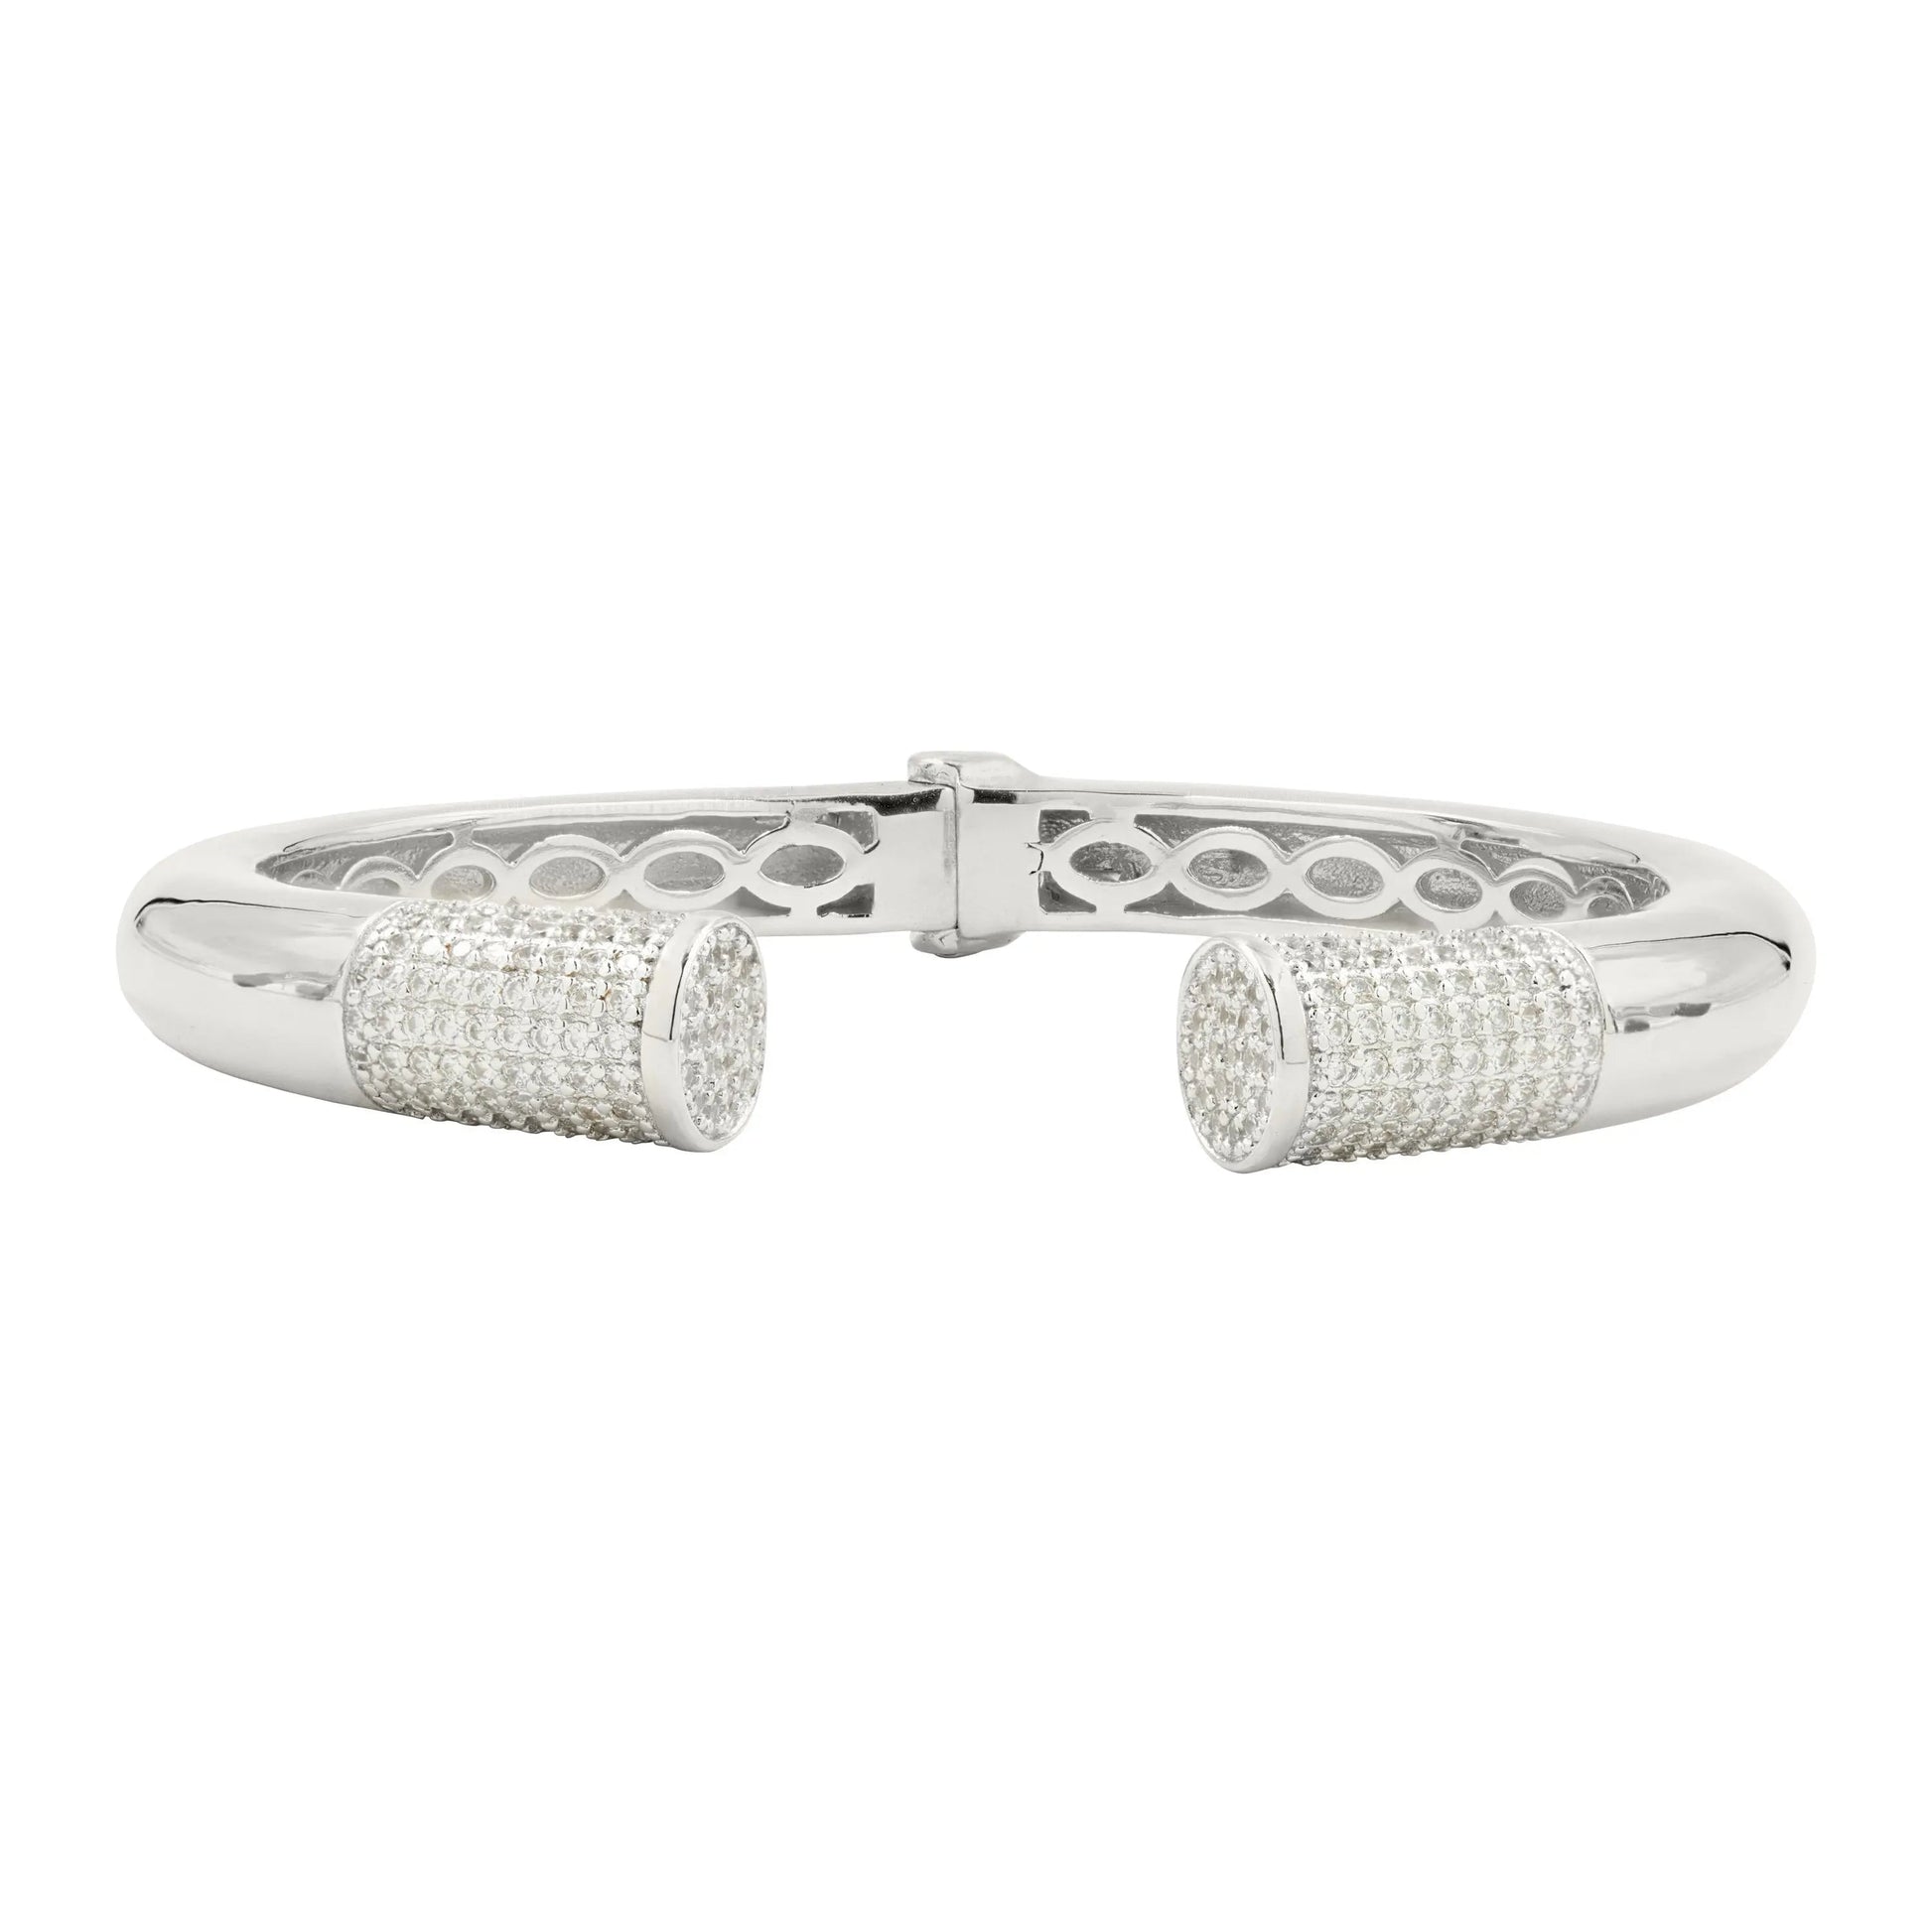 PlatinumonSterlingSilver Stand Out and Shine Cuff Radiance BRACELET